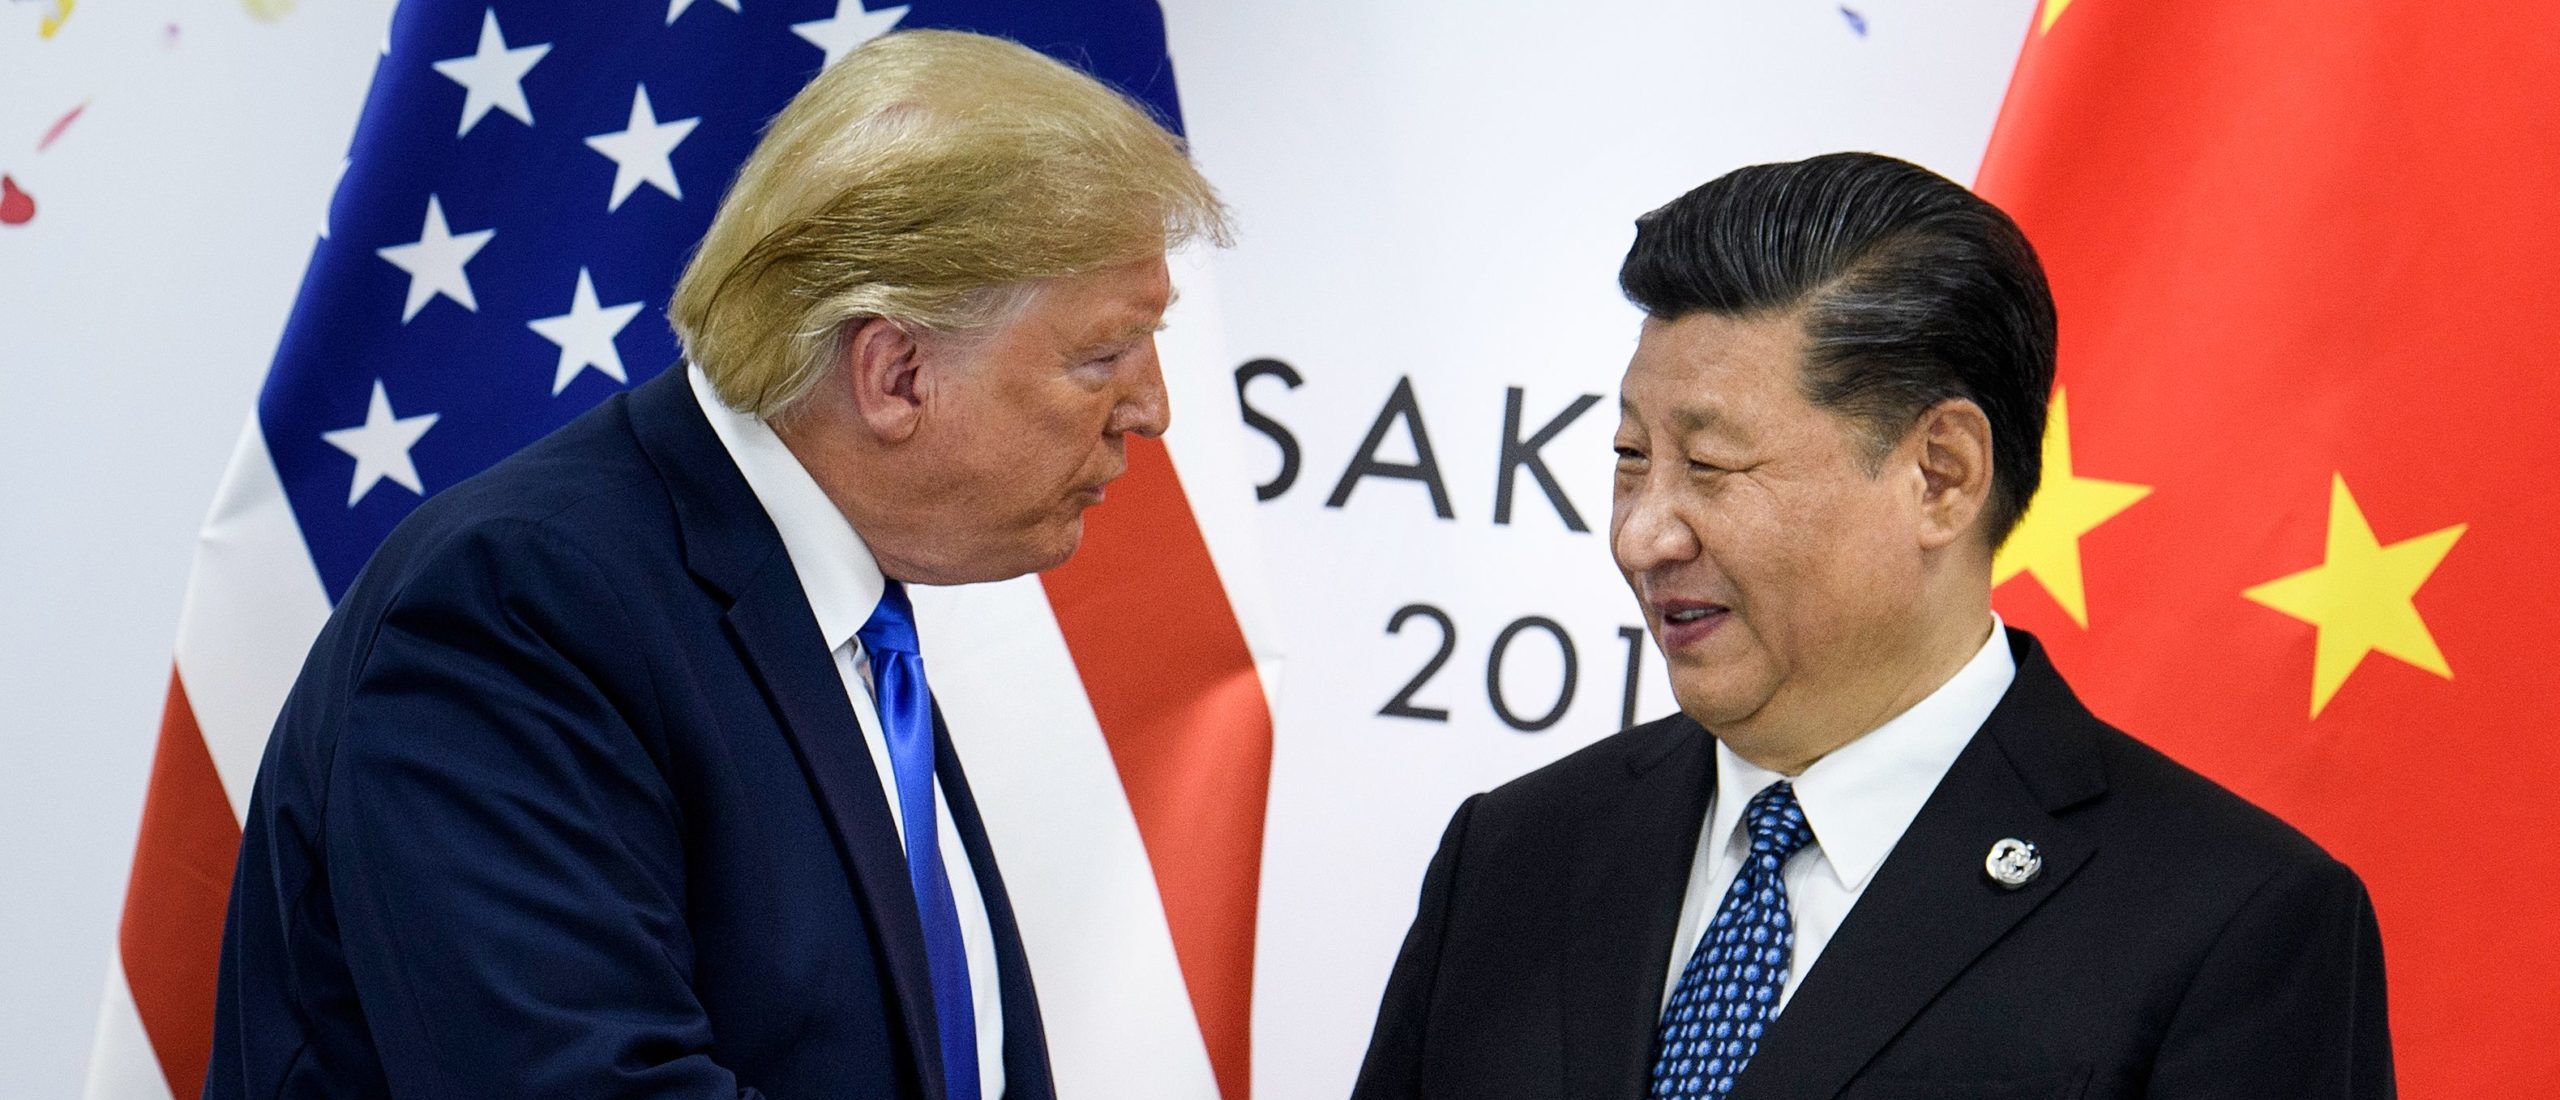 (FILES) In this file photo taken on June 28, 2019, China's President Xi Jinping (R) shakes hands with US President Donald Trump before a bilateral meeting on the sidelines of the G20 Summit in Osaka. - From the Arab Spring to bloodletting in Syria, from Obama to Trump, from terror in the streets of Paris to Brexit, the 2010s began with hope for a more equitable world, and end with a slide towards nationalistic populism. (Photo by BRENDAN SMIALOWSKI/AFP via Getty Images)